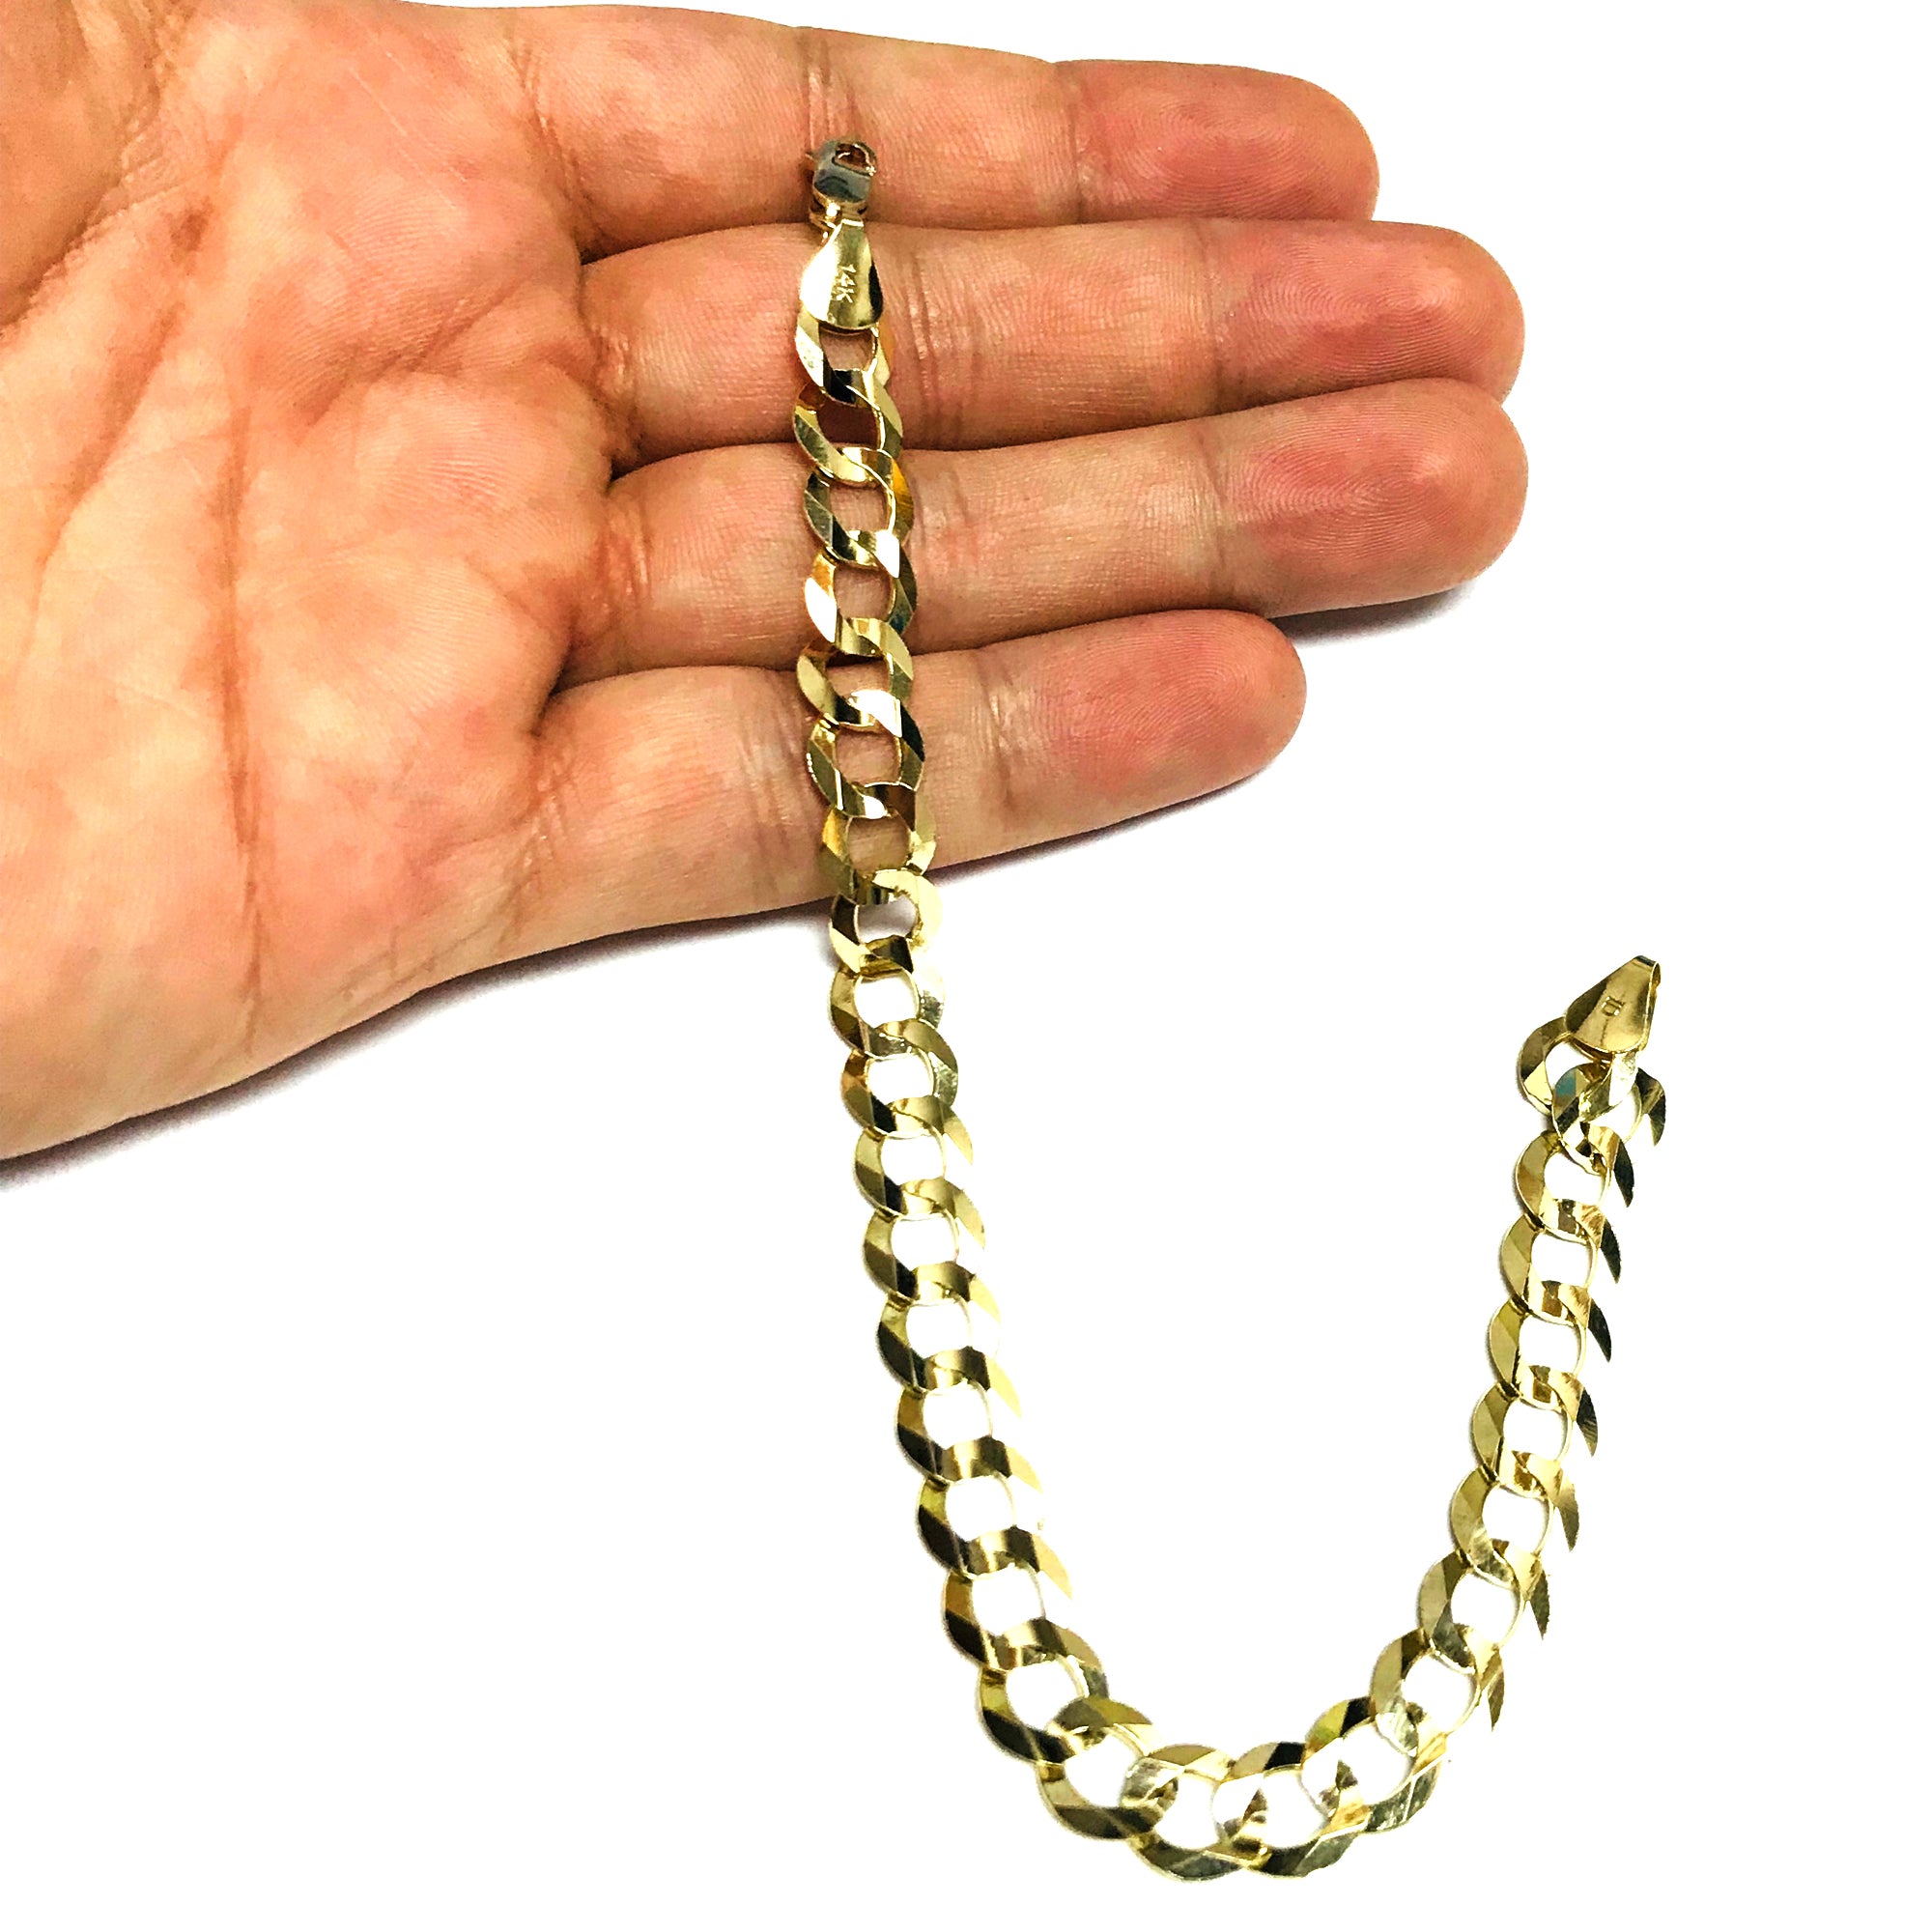 14k Yellow Solid Gold Comfort Curb Chain Bracelet, 8.2mm, 8.5" fine designer jewelry for men and women